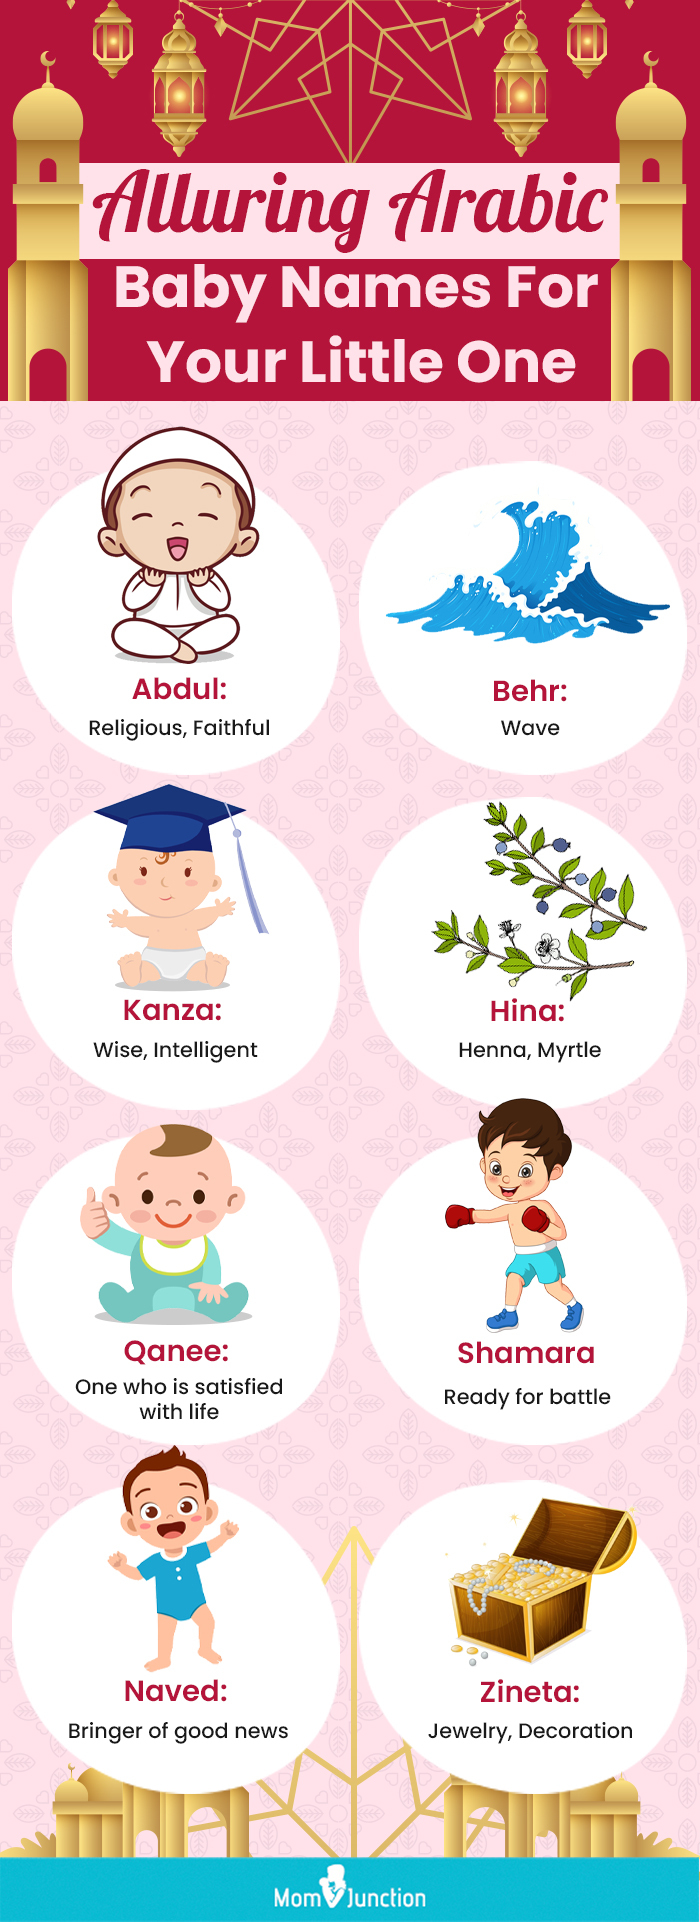 alluring arabic baby names for your little one (infographic)